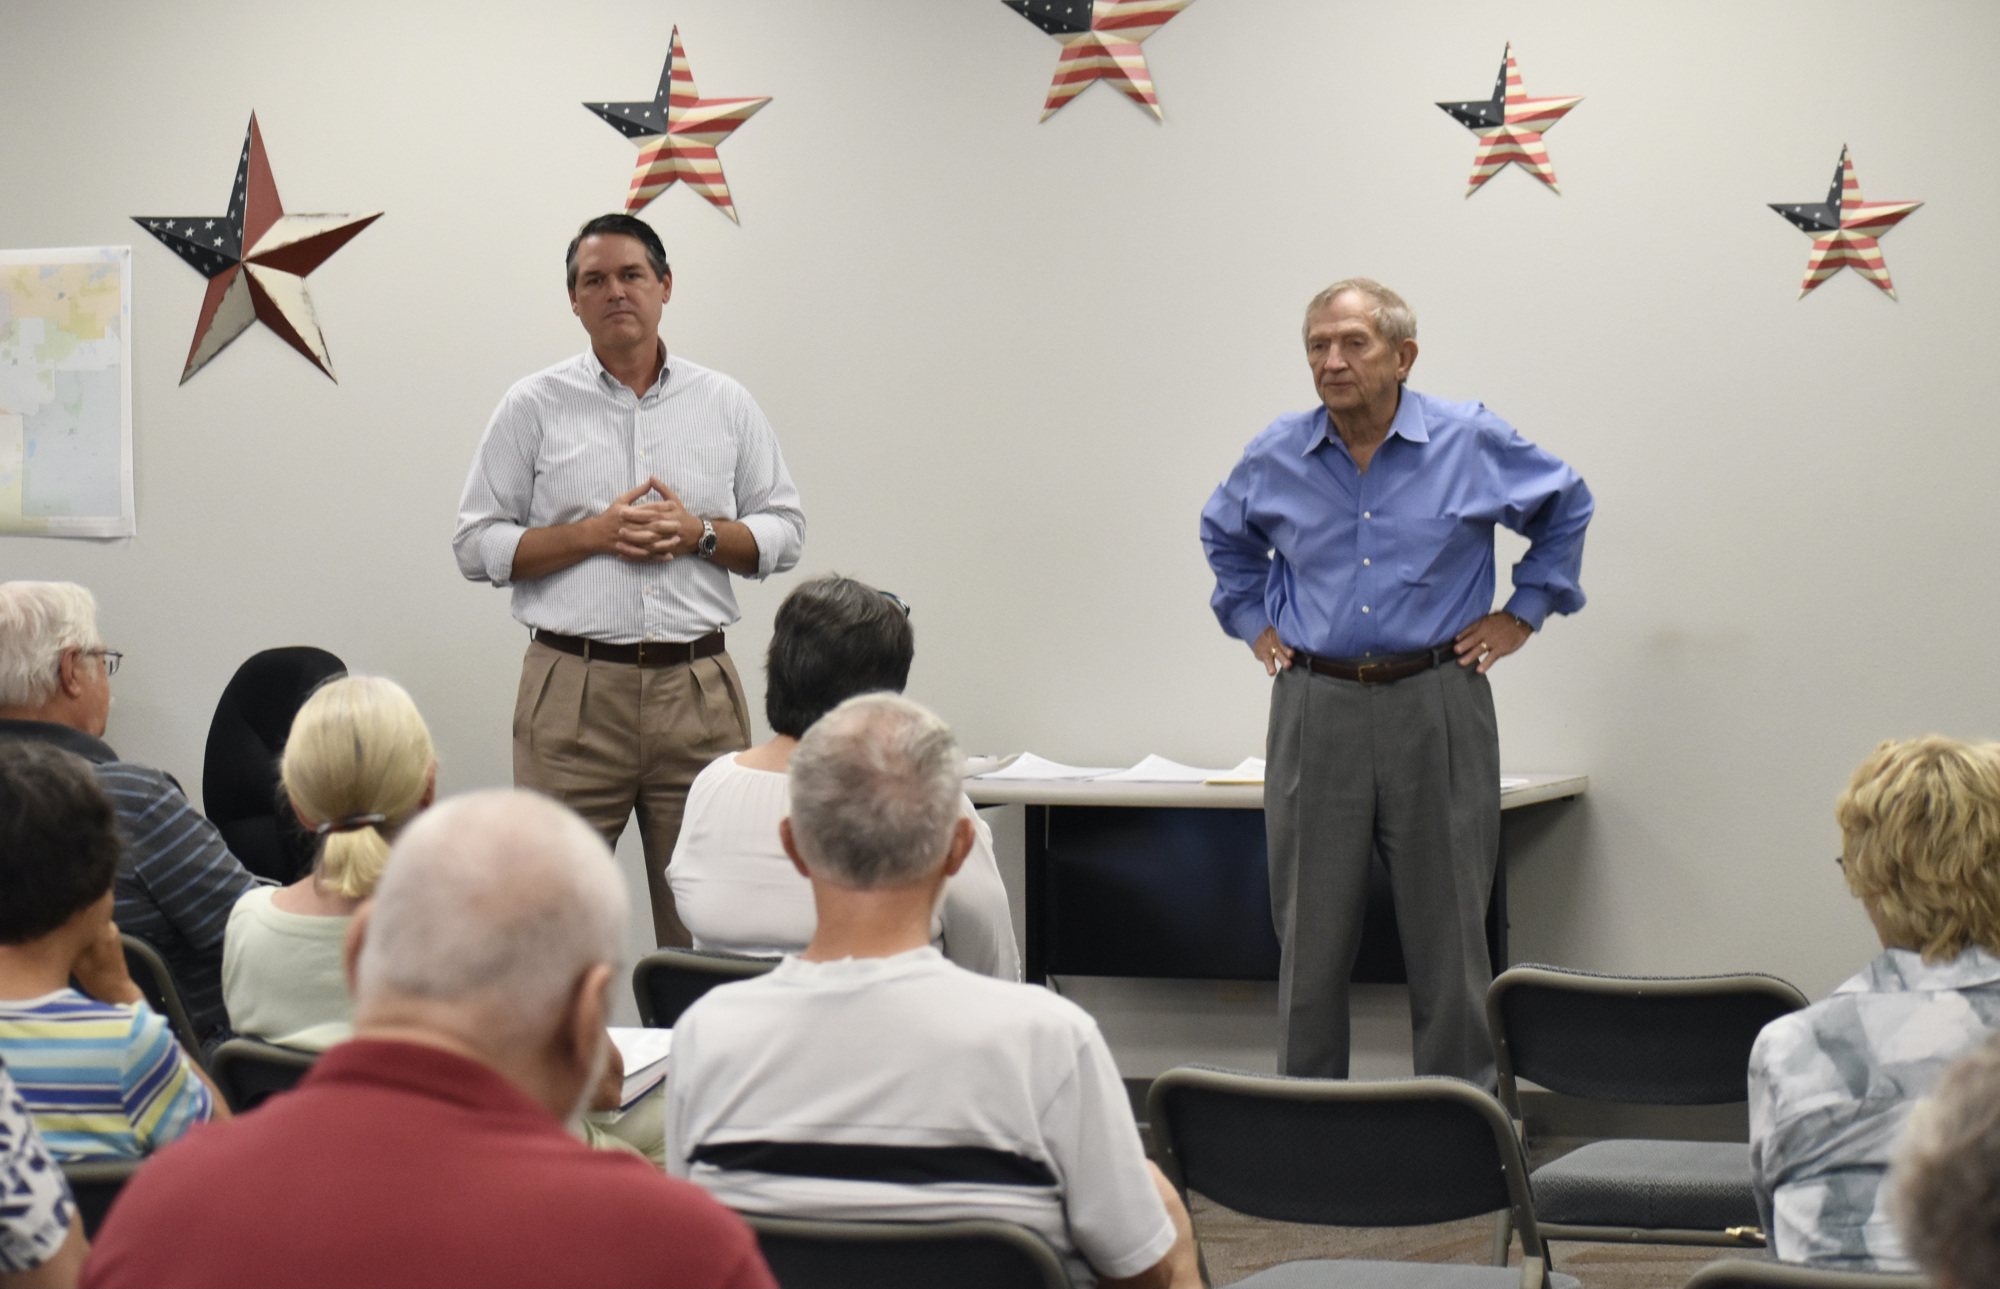 Secretary of State of Florida Cord Byrd and Manatee County Supervisor of Elections Michael Bennett address attendees at a poll worker class.